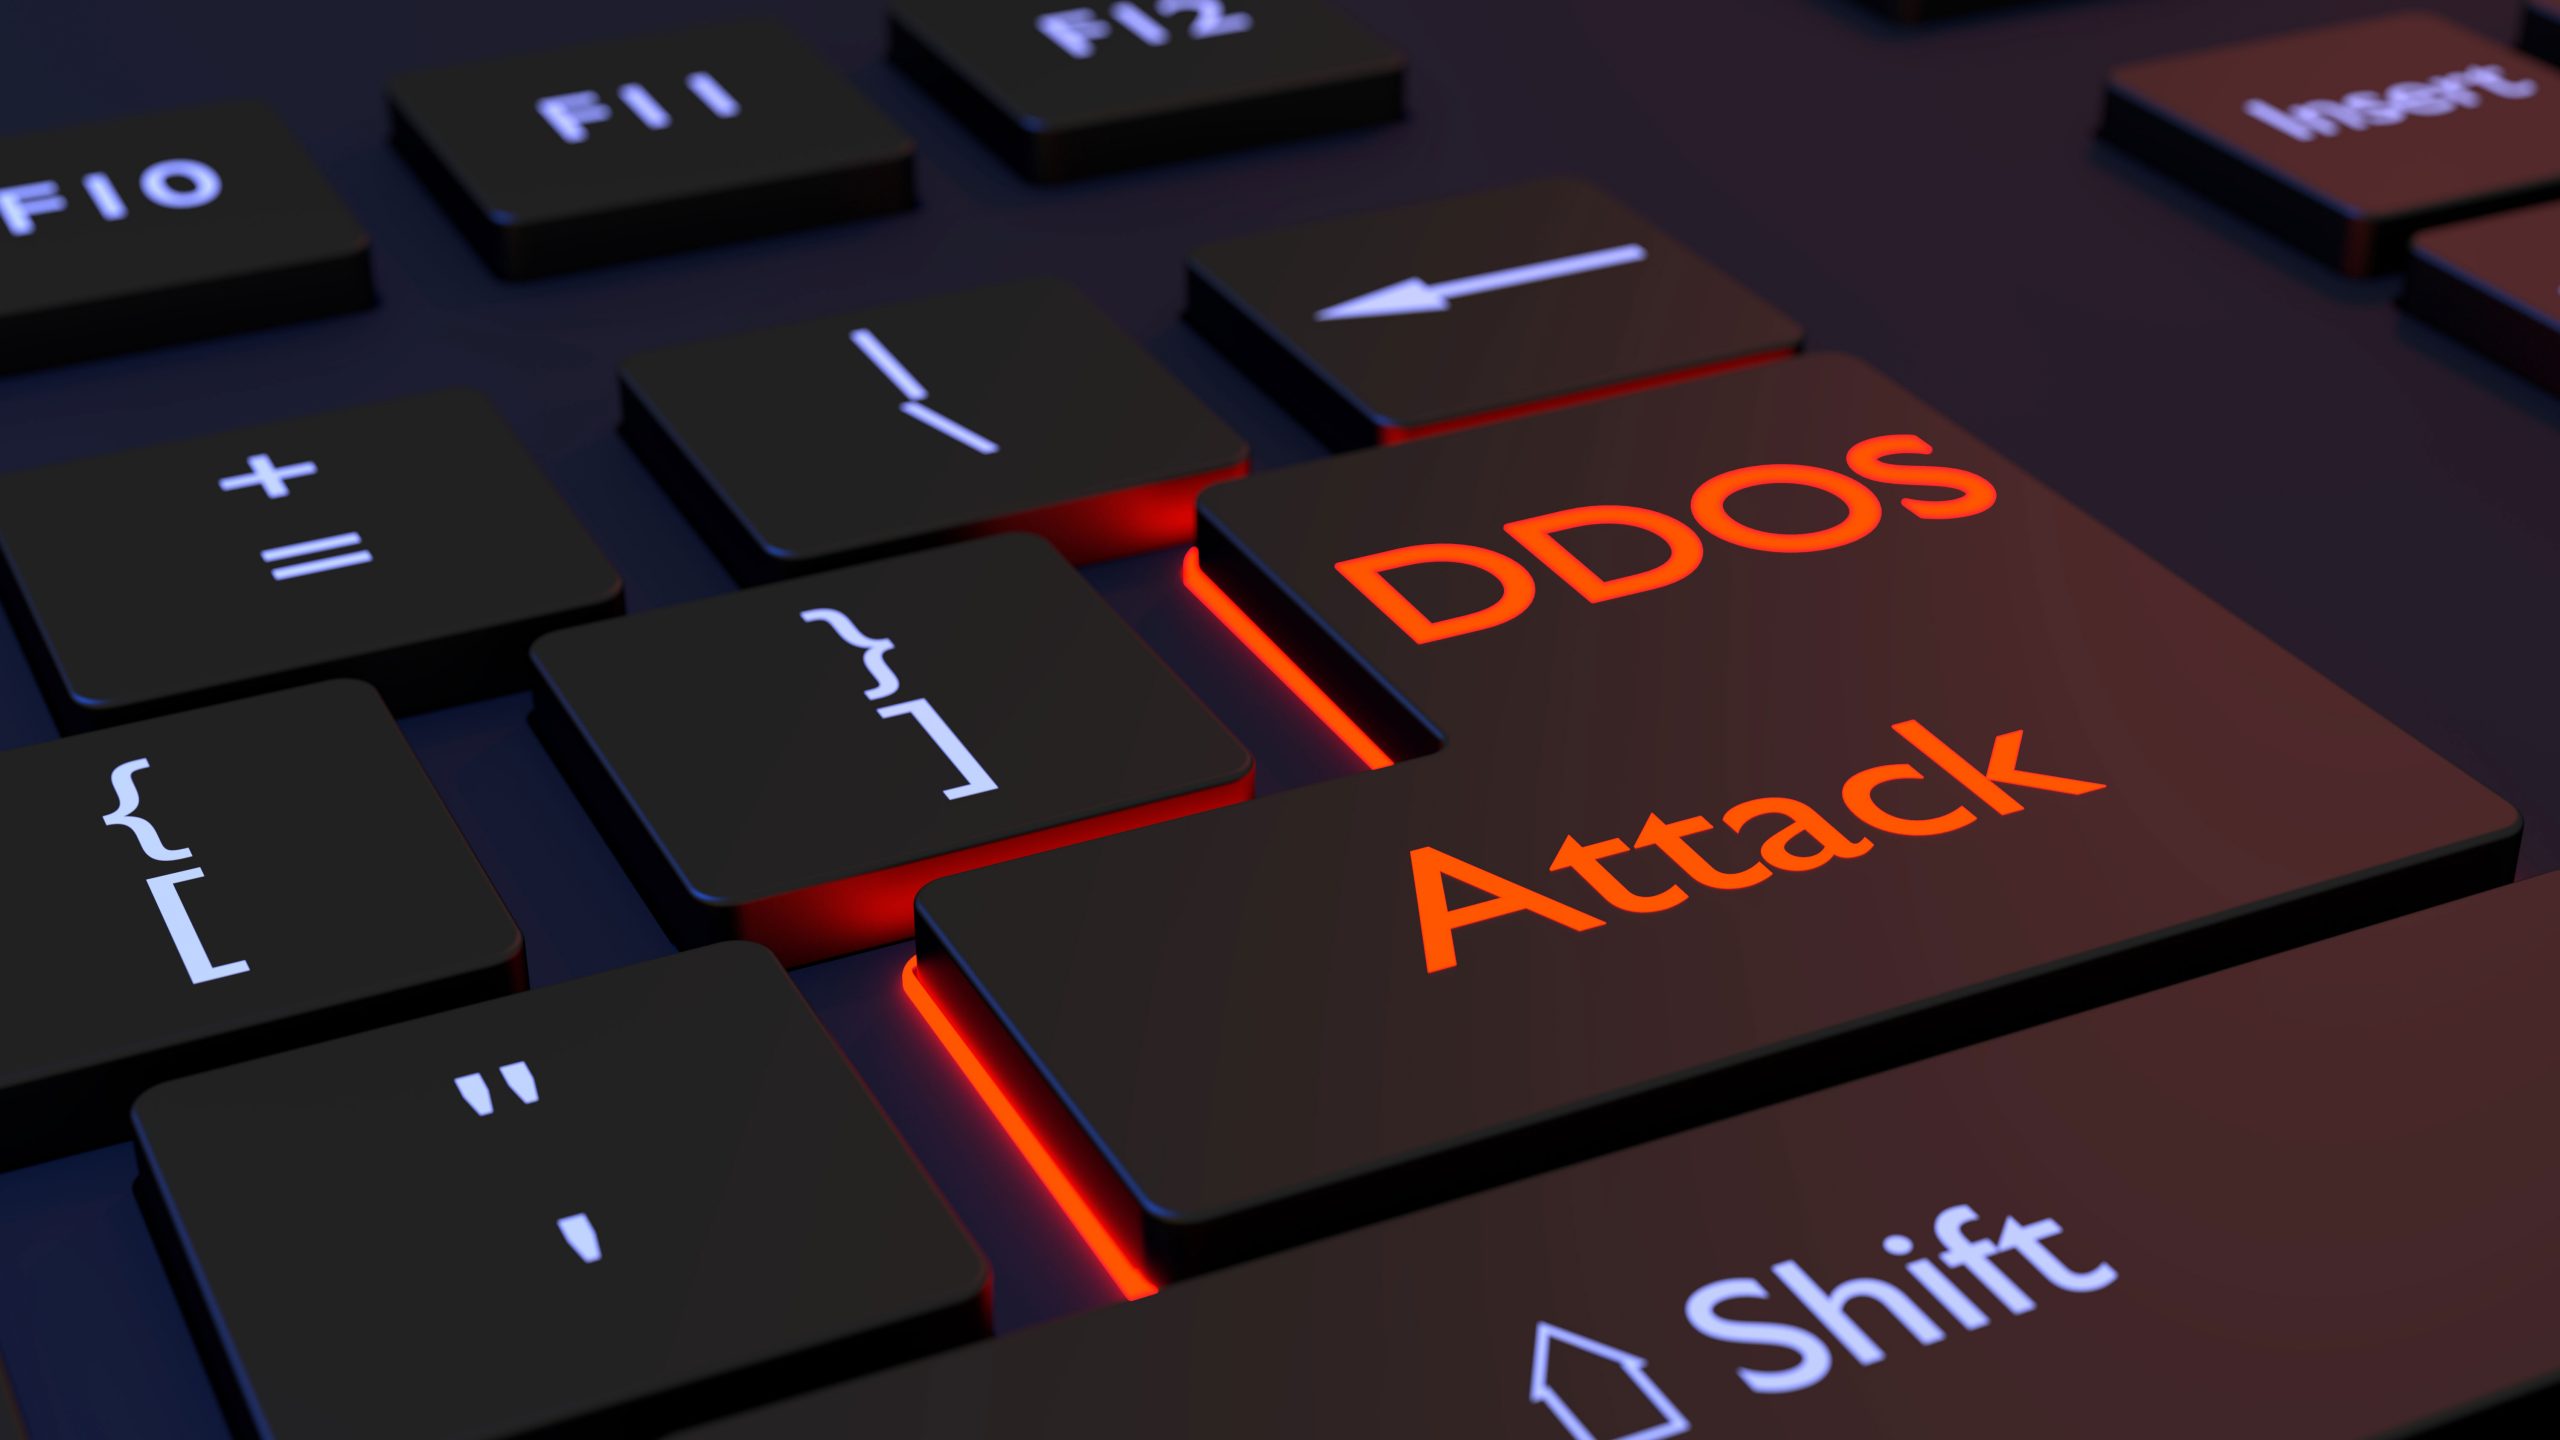 DDoS attacks in Q3 2021: IT infrastructure providers targeted